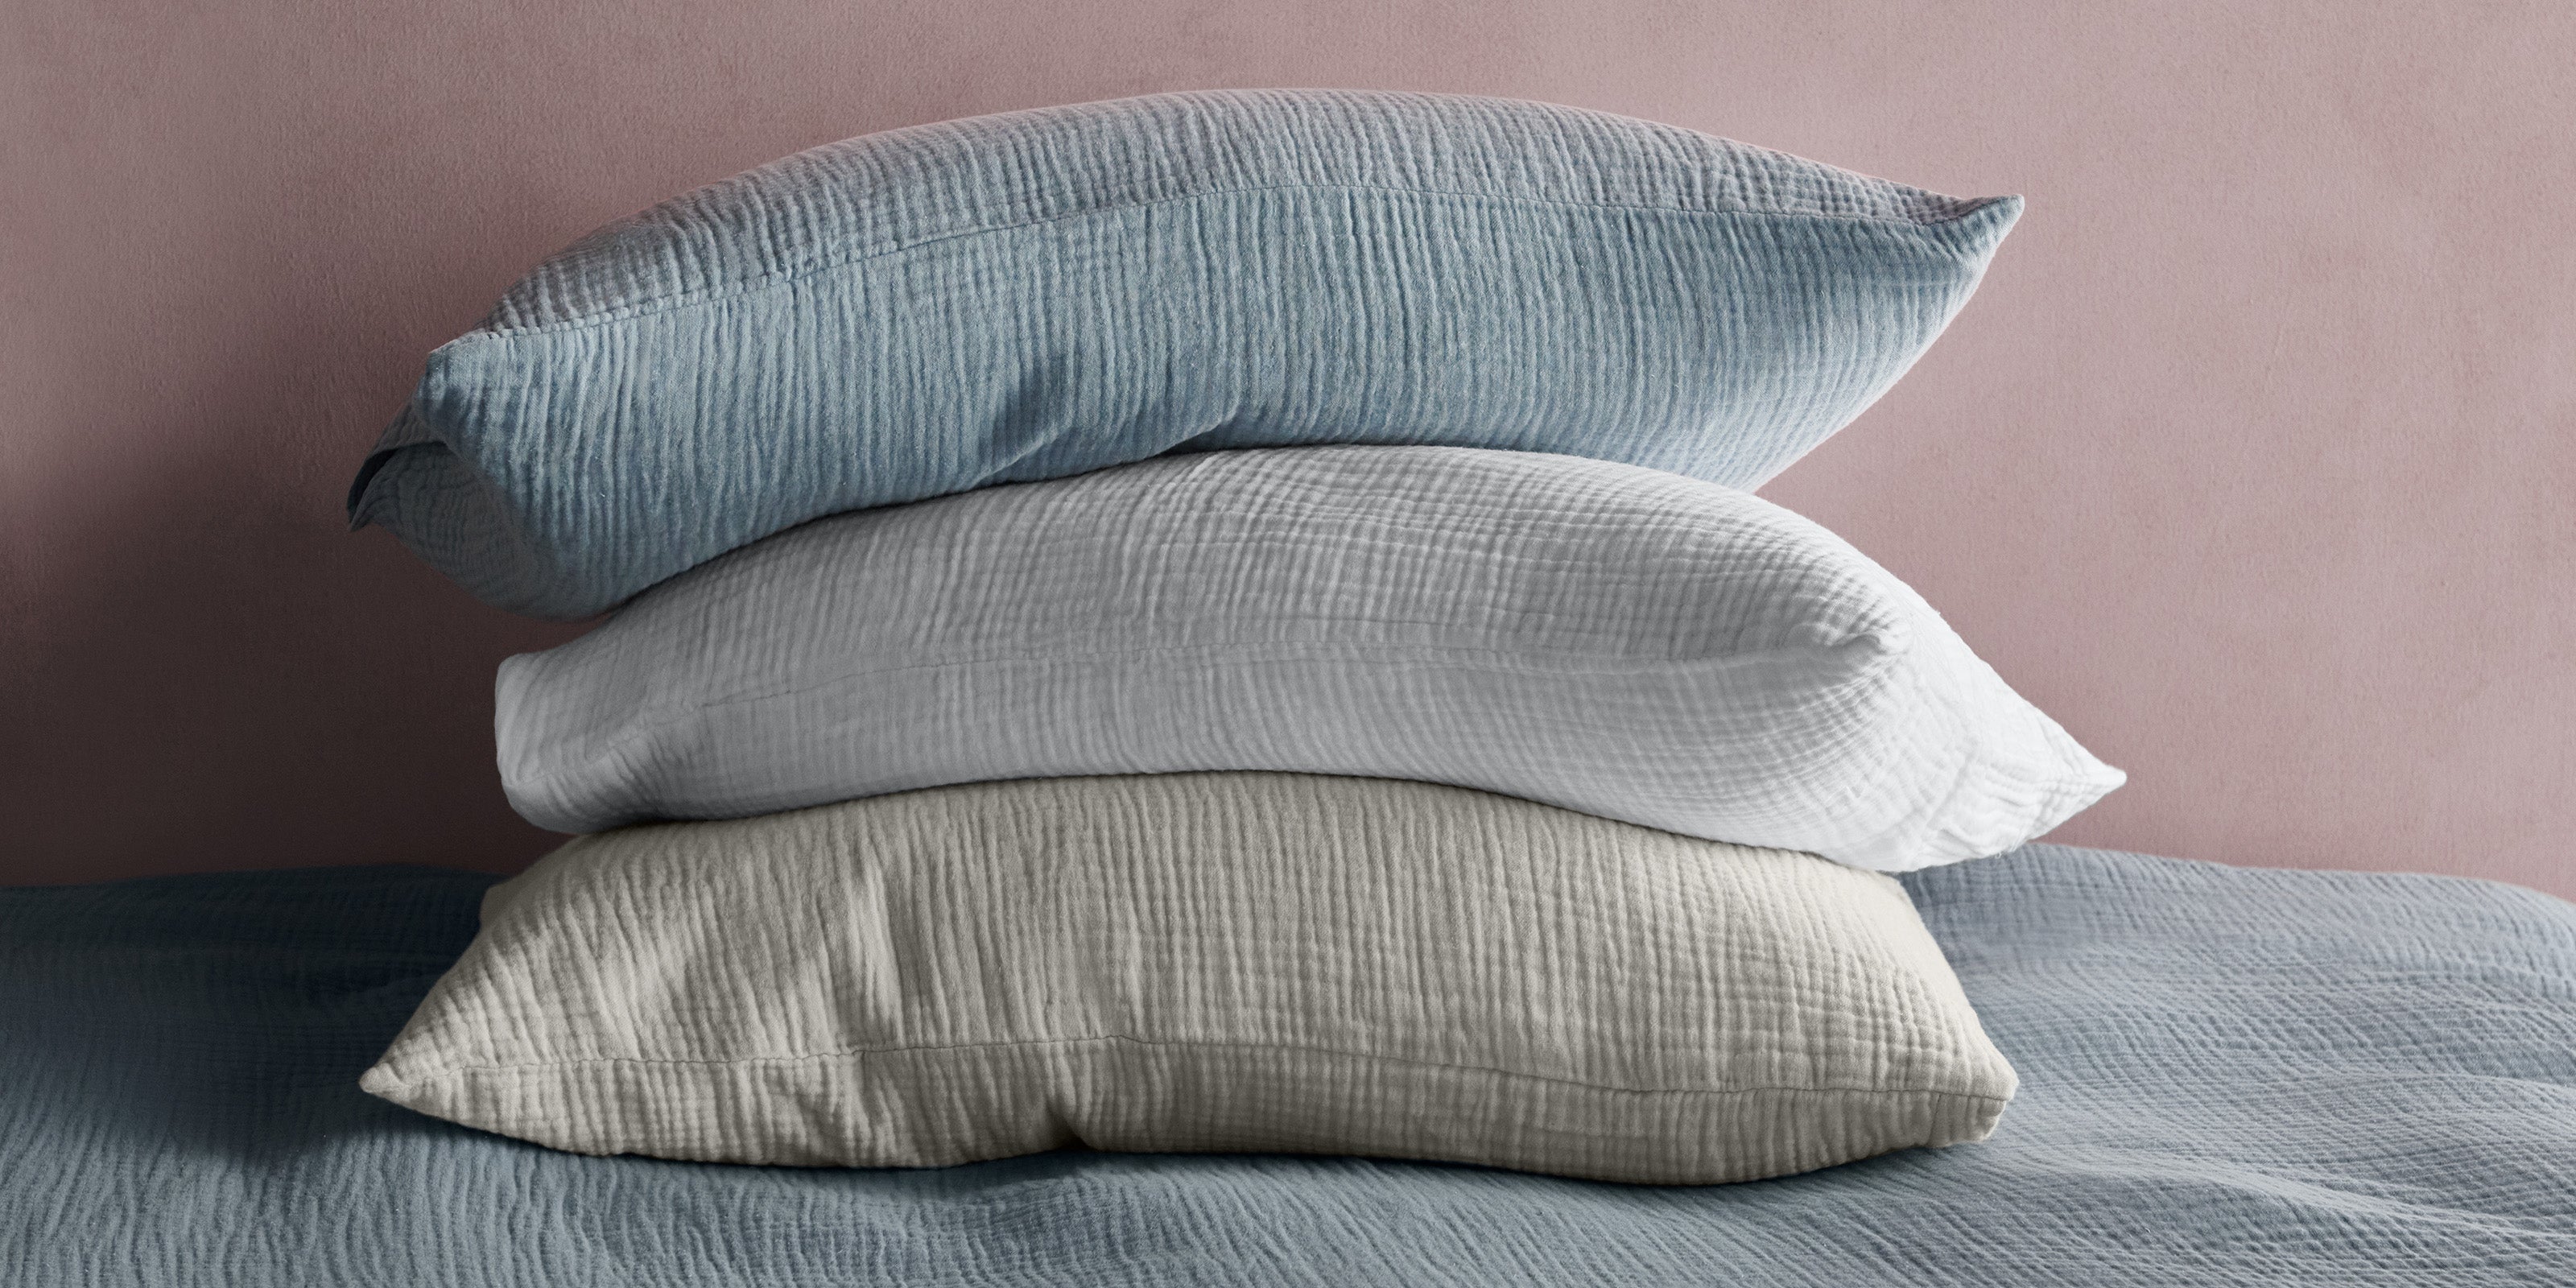 Three muslin pillows stacked on top of one another in blue, white and grey, against a pink concrete wall, on a blue muslin bed